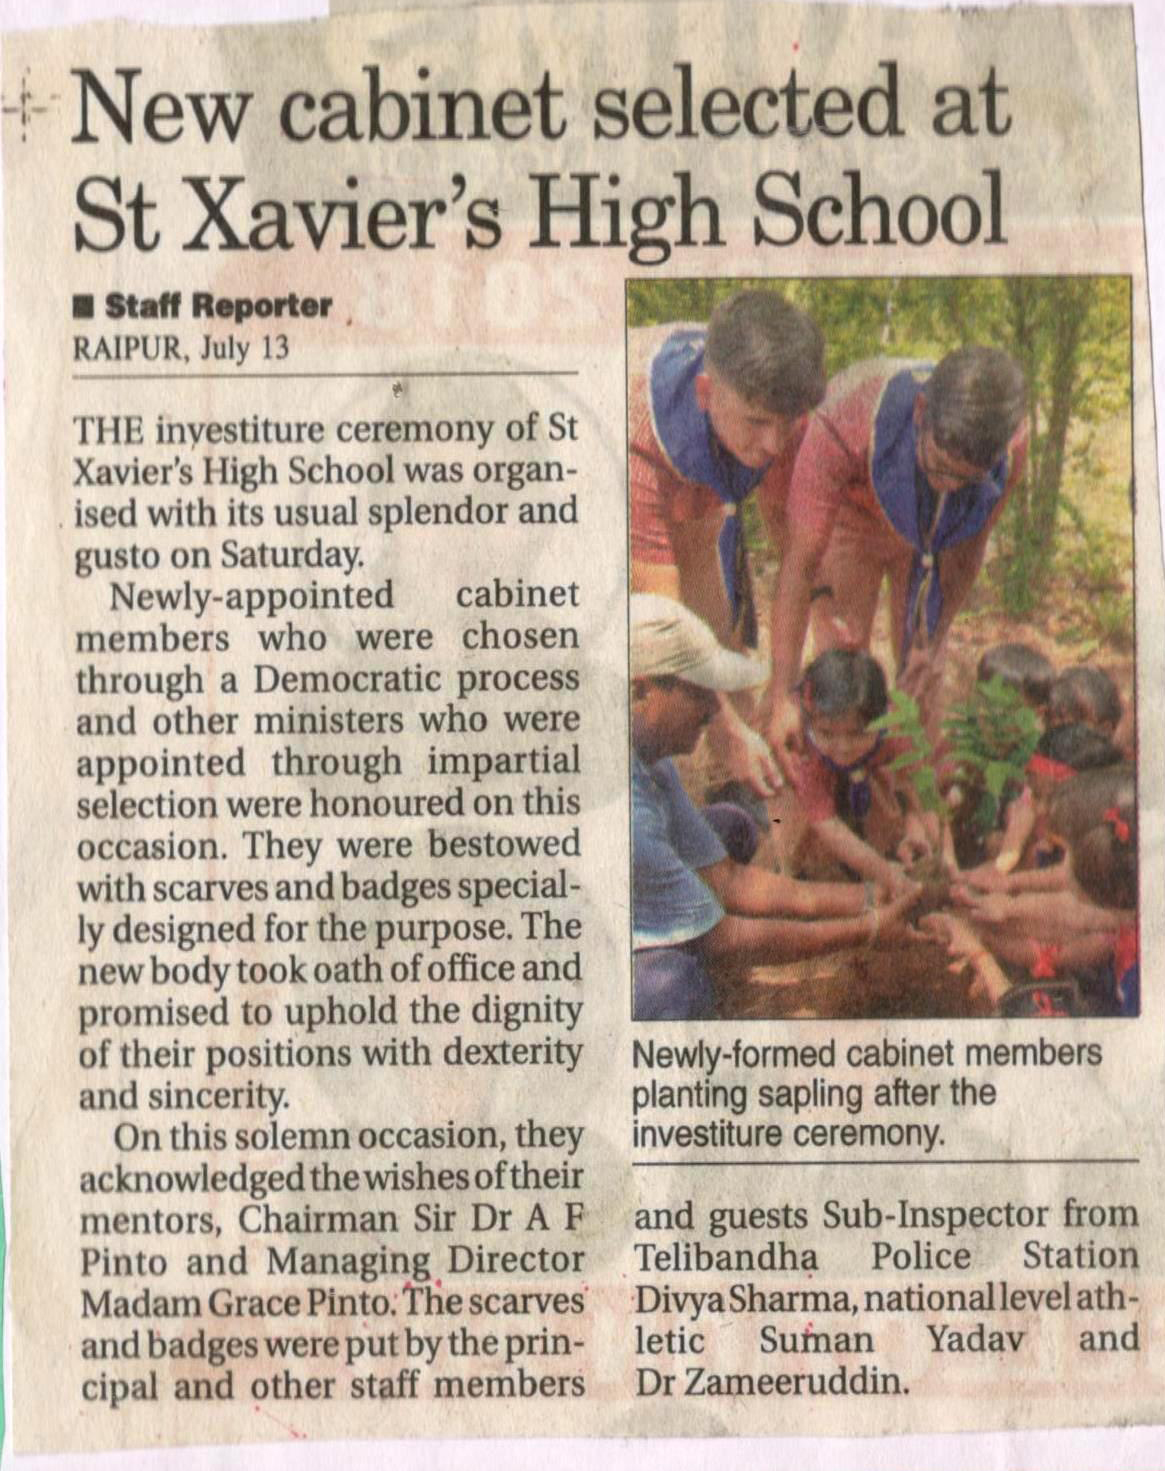 New cabinet selected at St. Xavier's High School